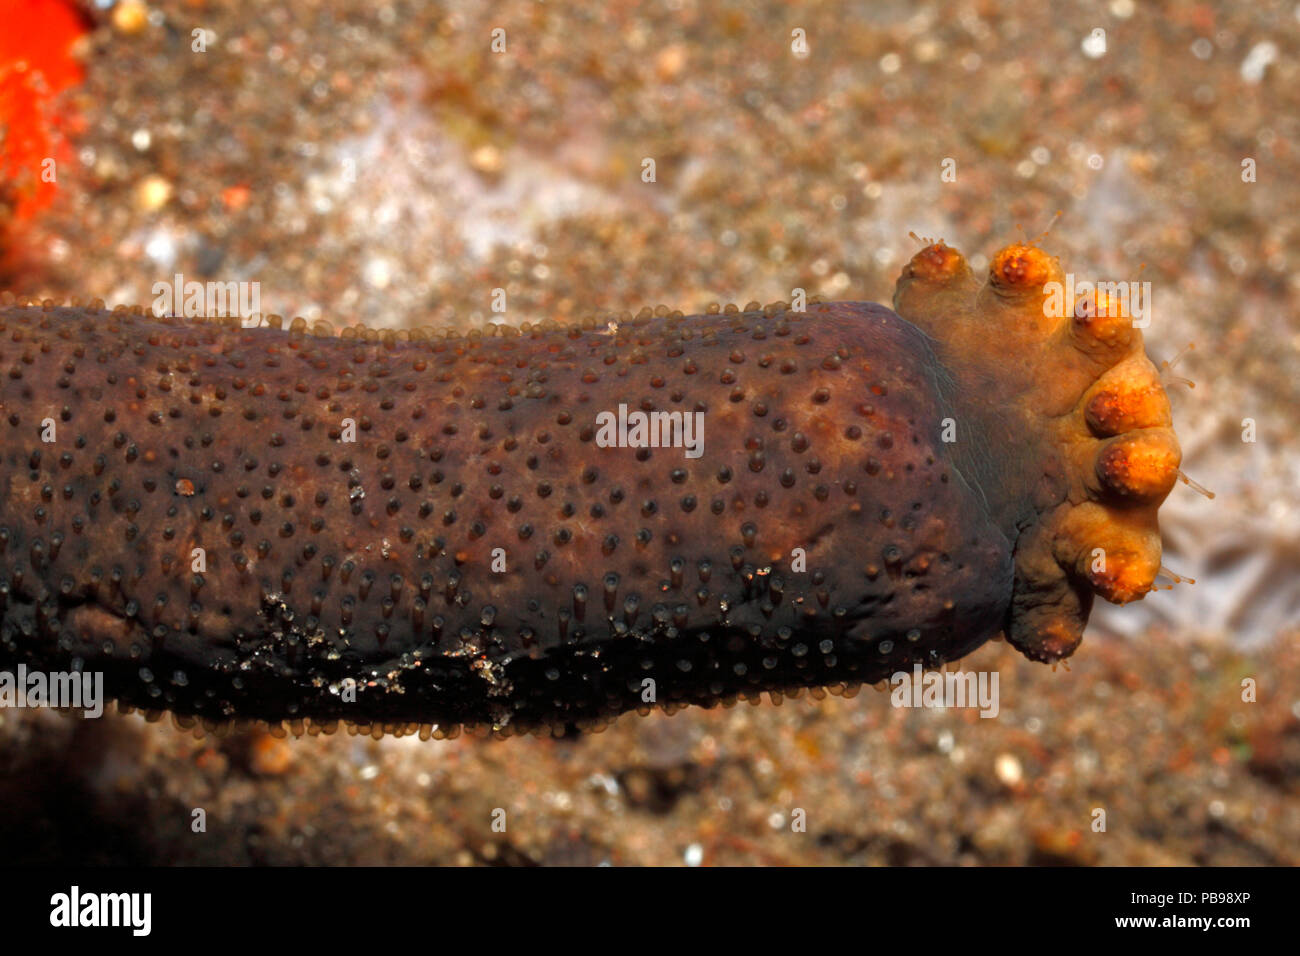 Luzon Sea Star, Echinaster luzonicus, showing a seven arm regeneration growing from the stump of a 'parent' arm. Please see below for more information Stock Photo